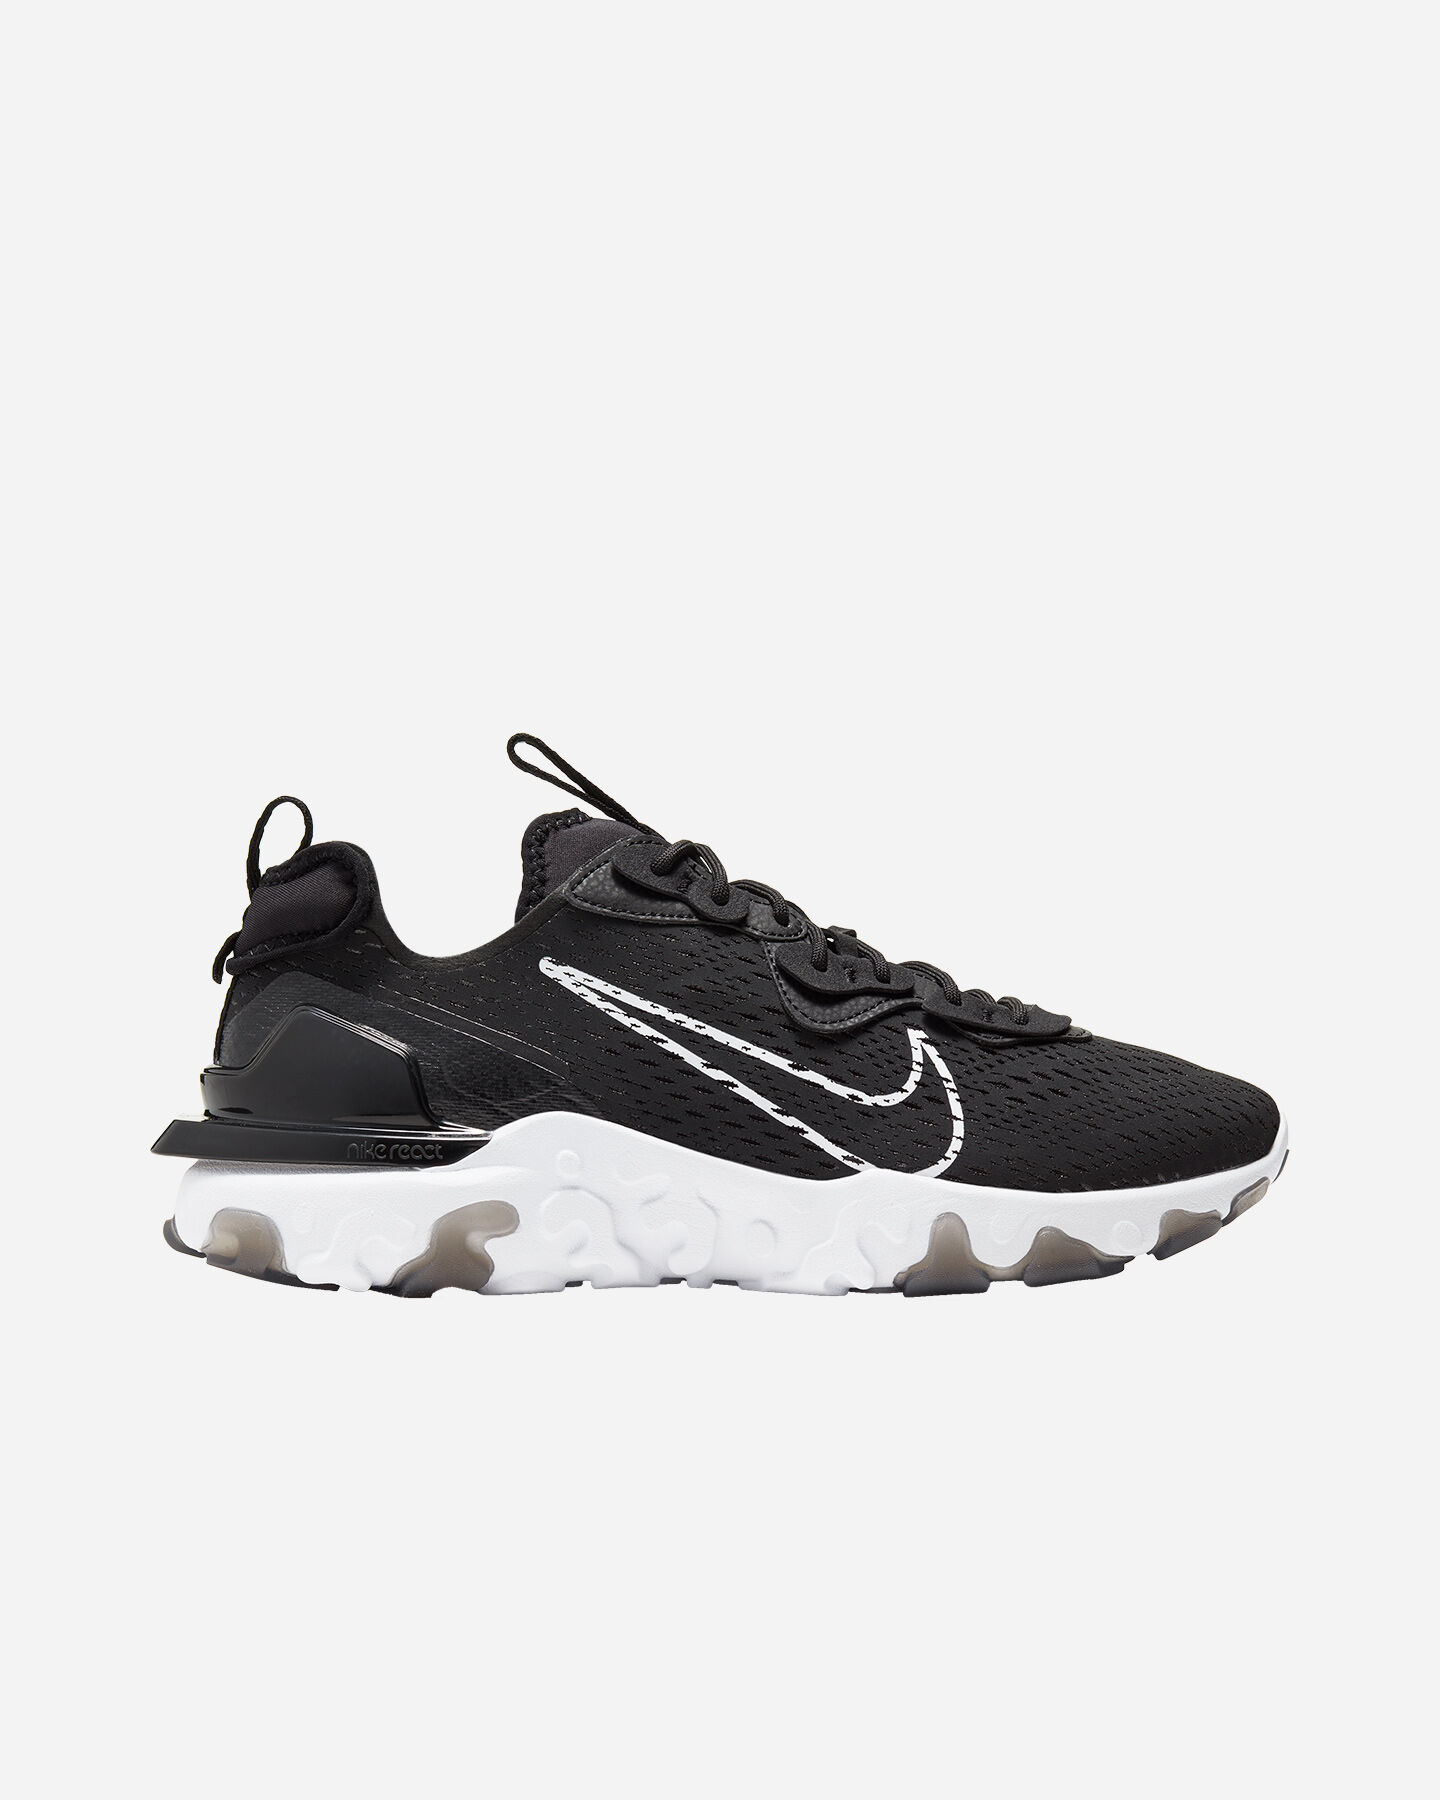  Scarpe sneakers NIKE REACT VISION M S5199847|101|8.5 scatto 0